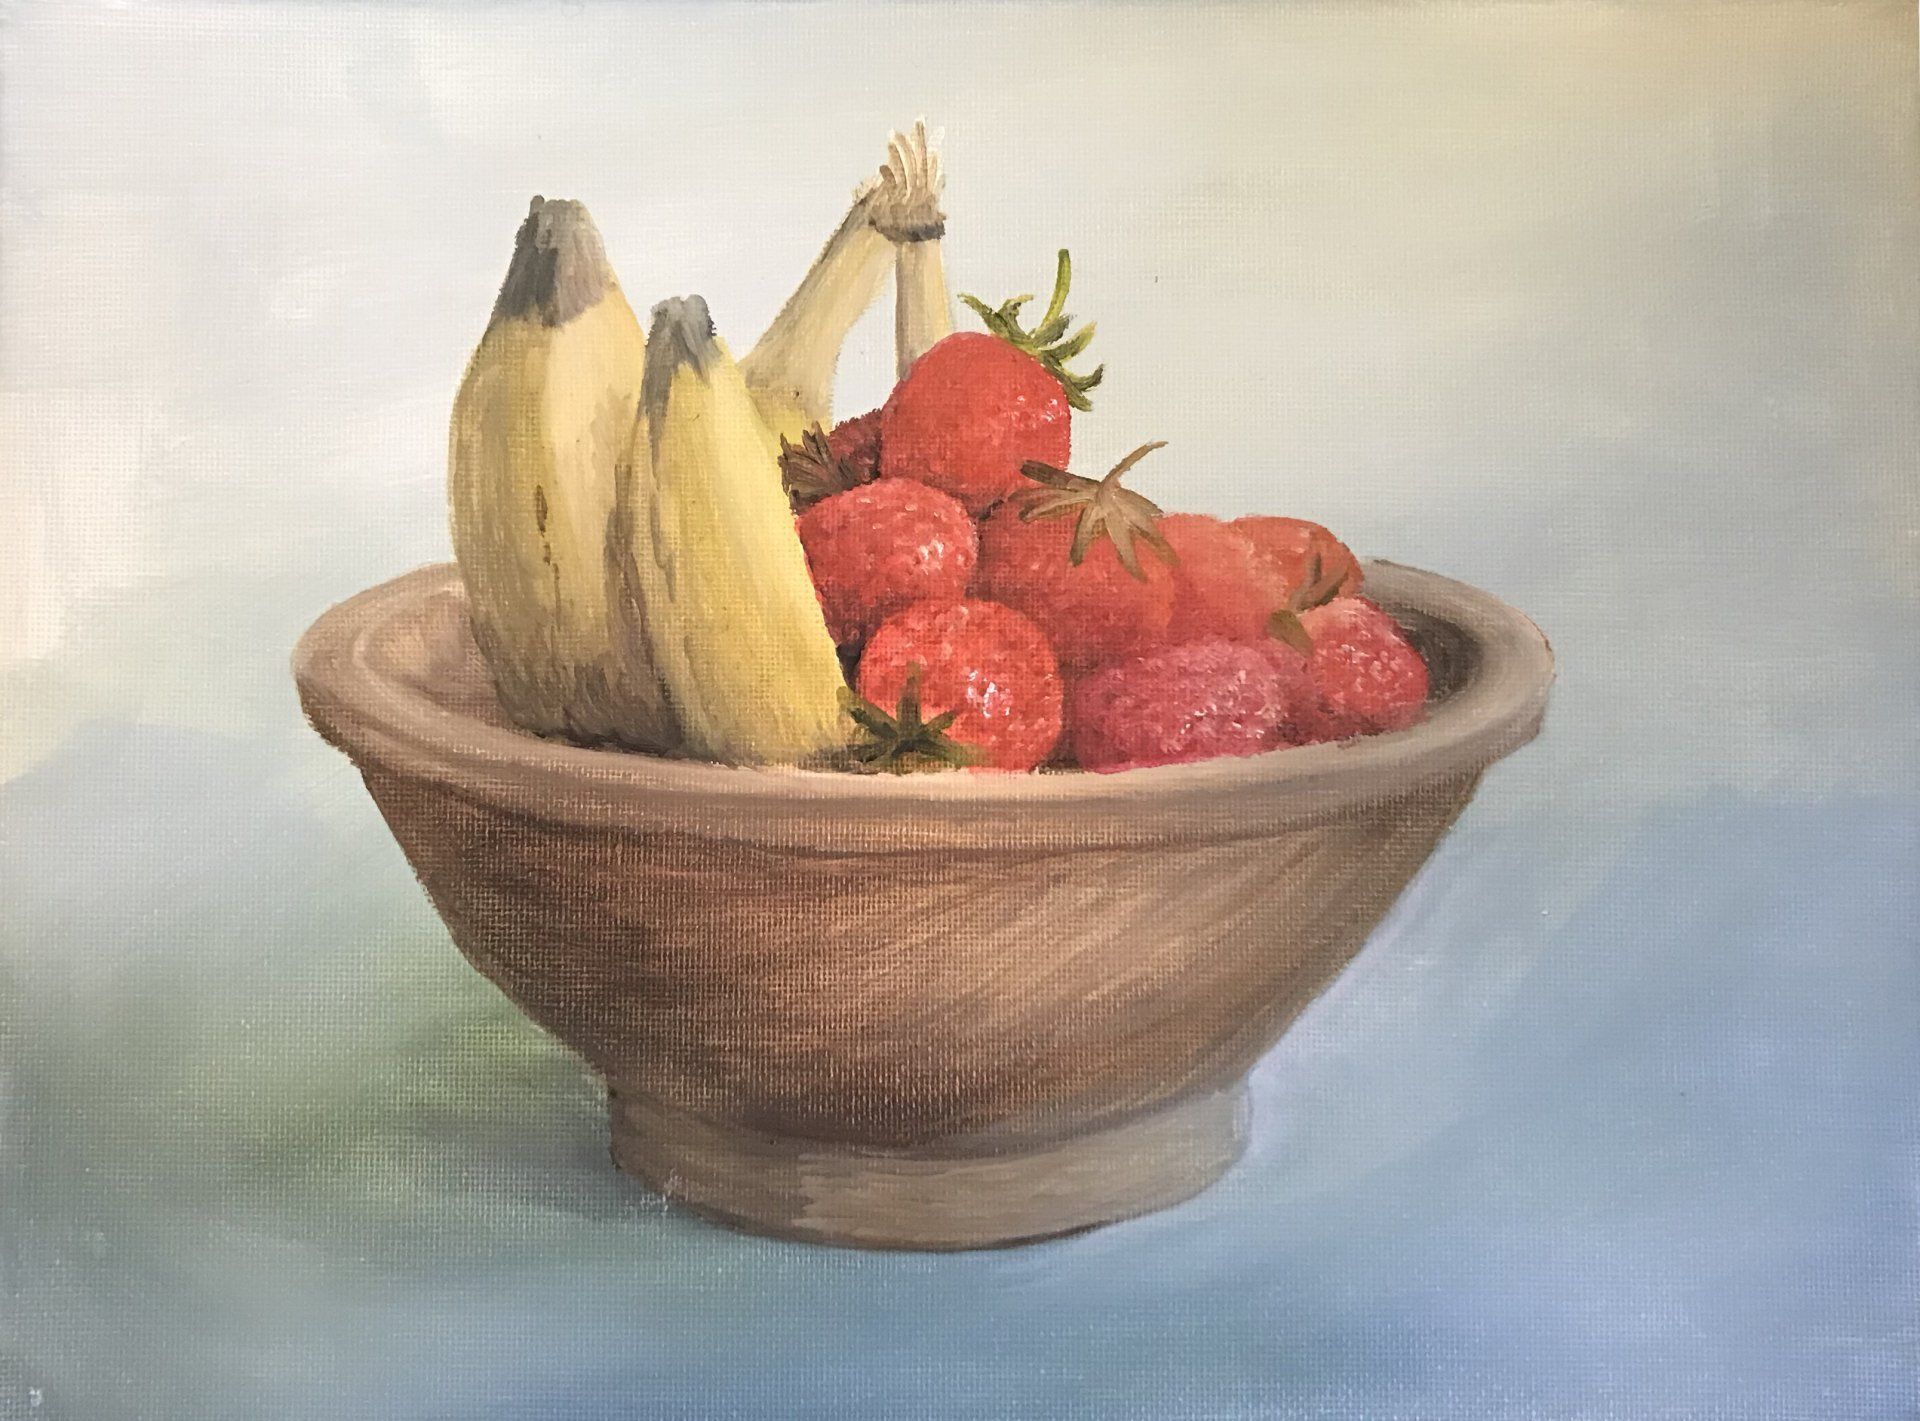 Still life with strawberries and bananas